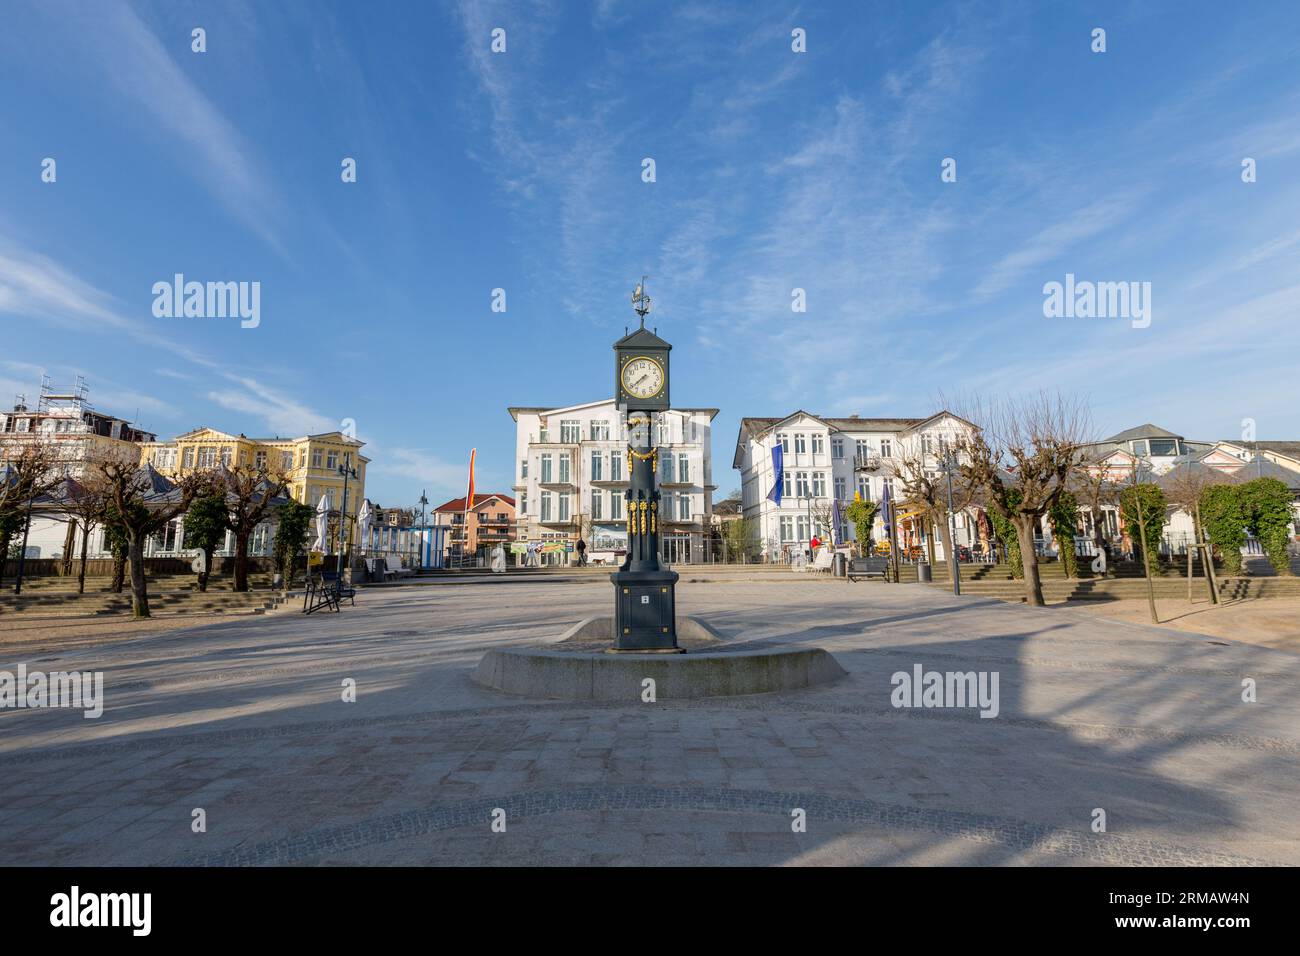 Ahlbeck, Germany - April 17, 2014: old clock tower at the scenic promenade with historic in wilhelminian style hotels in Ahlbeck, Germany. Stock Photo